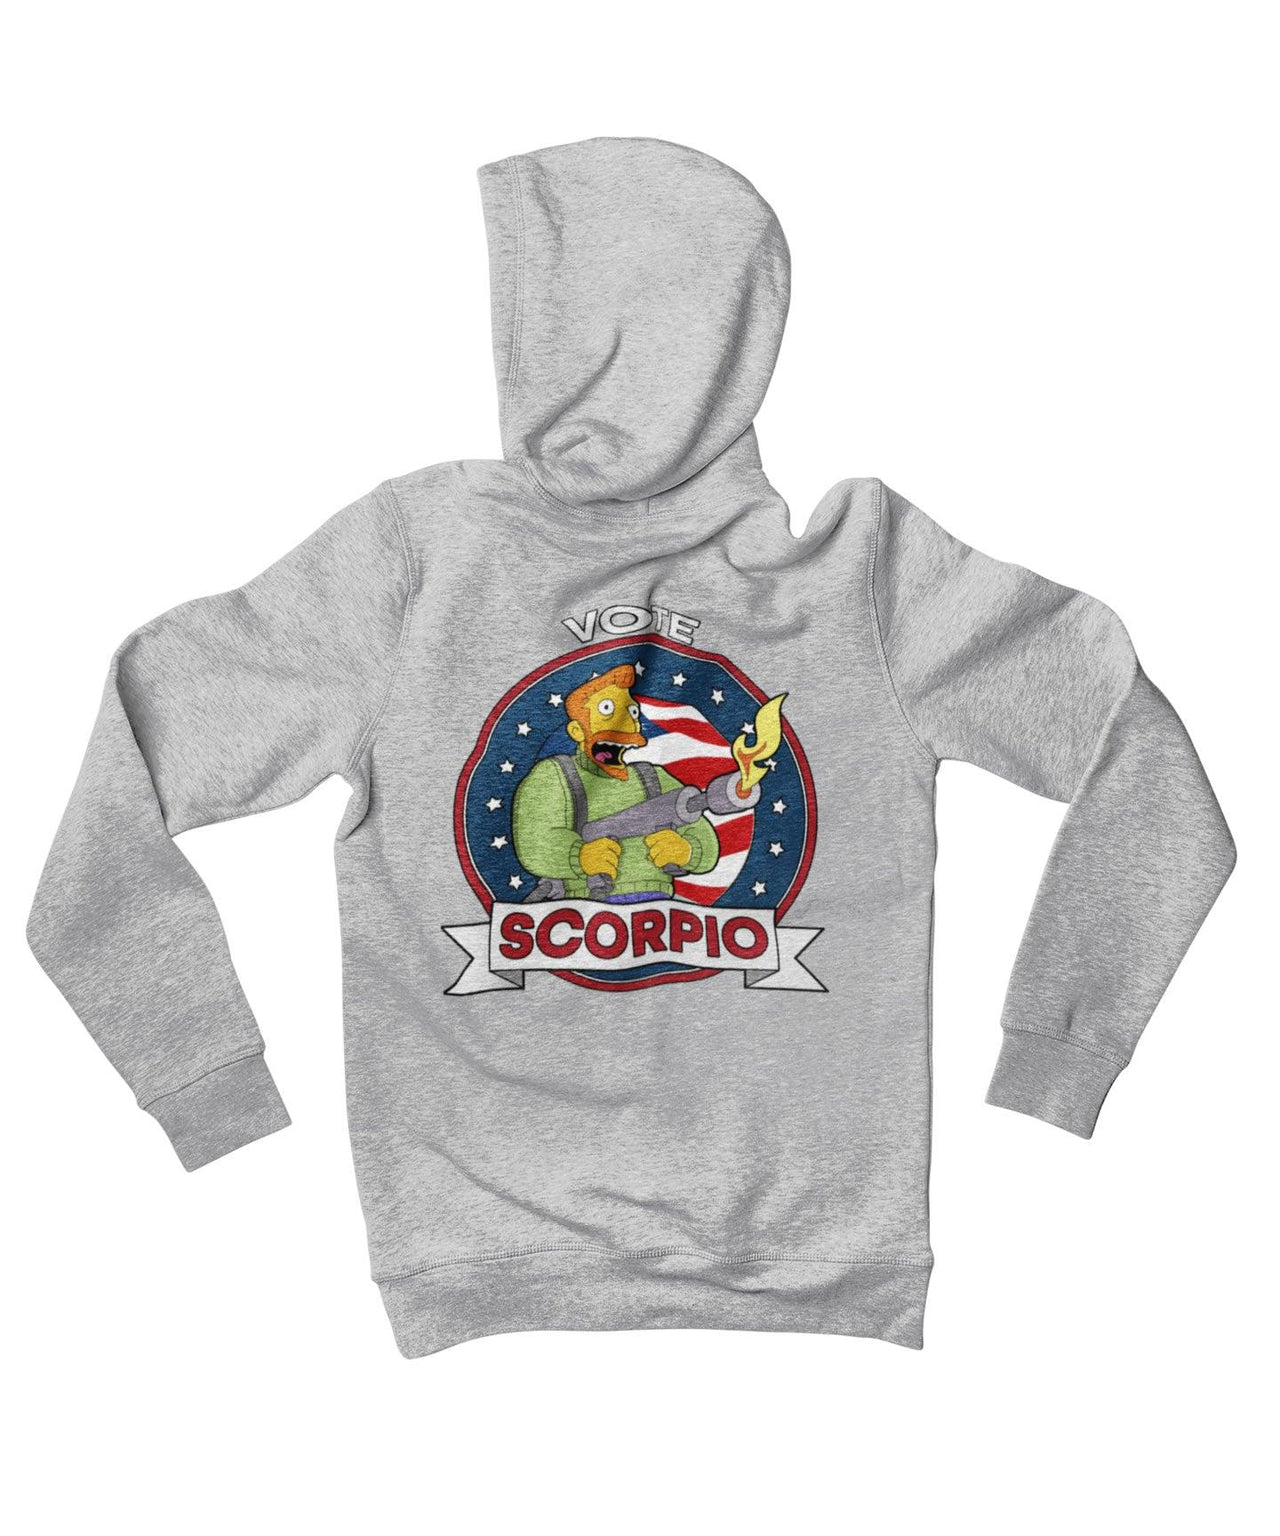 Top Notchy Vote Scorpio Back Printed Graphic Hoodie 8Ball